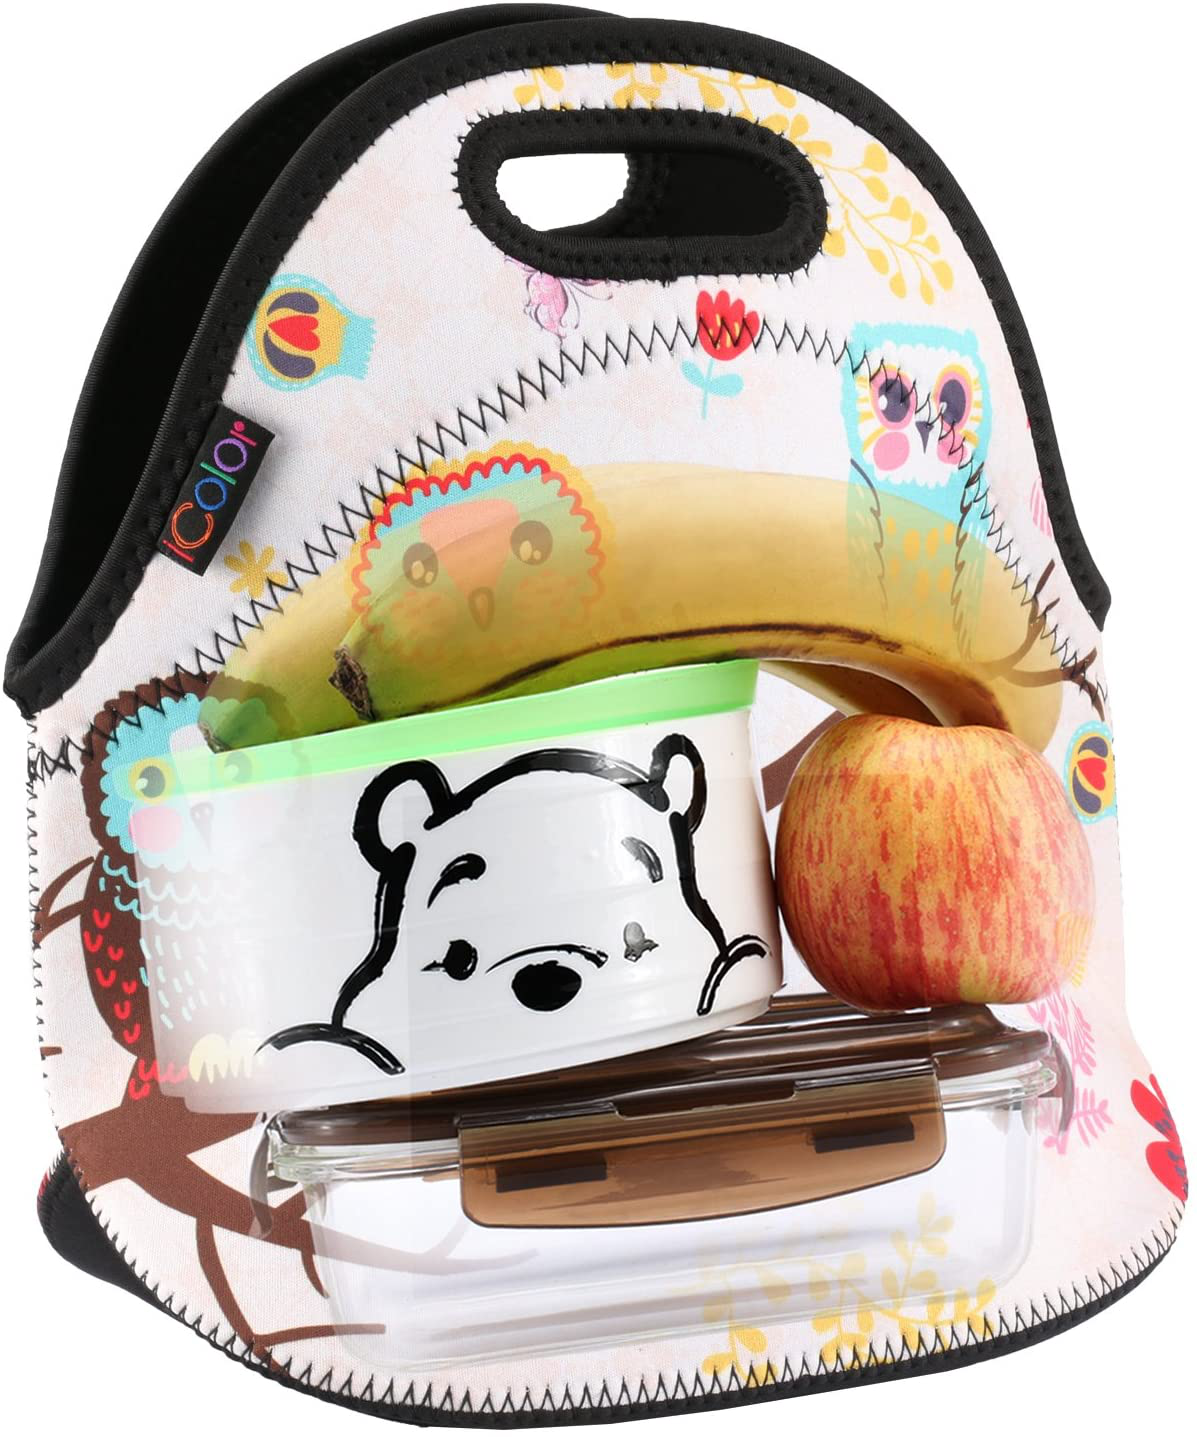 iColor Unicorn Universal Neoprene Sleeve Lunch bag Insulated warm/cold lunchbox Cooler Pouch Shopper Tote baby Portable Waterproof Cover Kids Handbag Food Carrying Case Protector Handle School Work